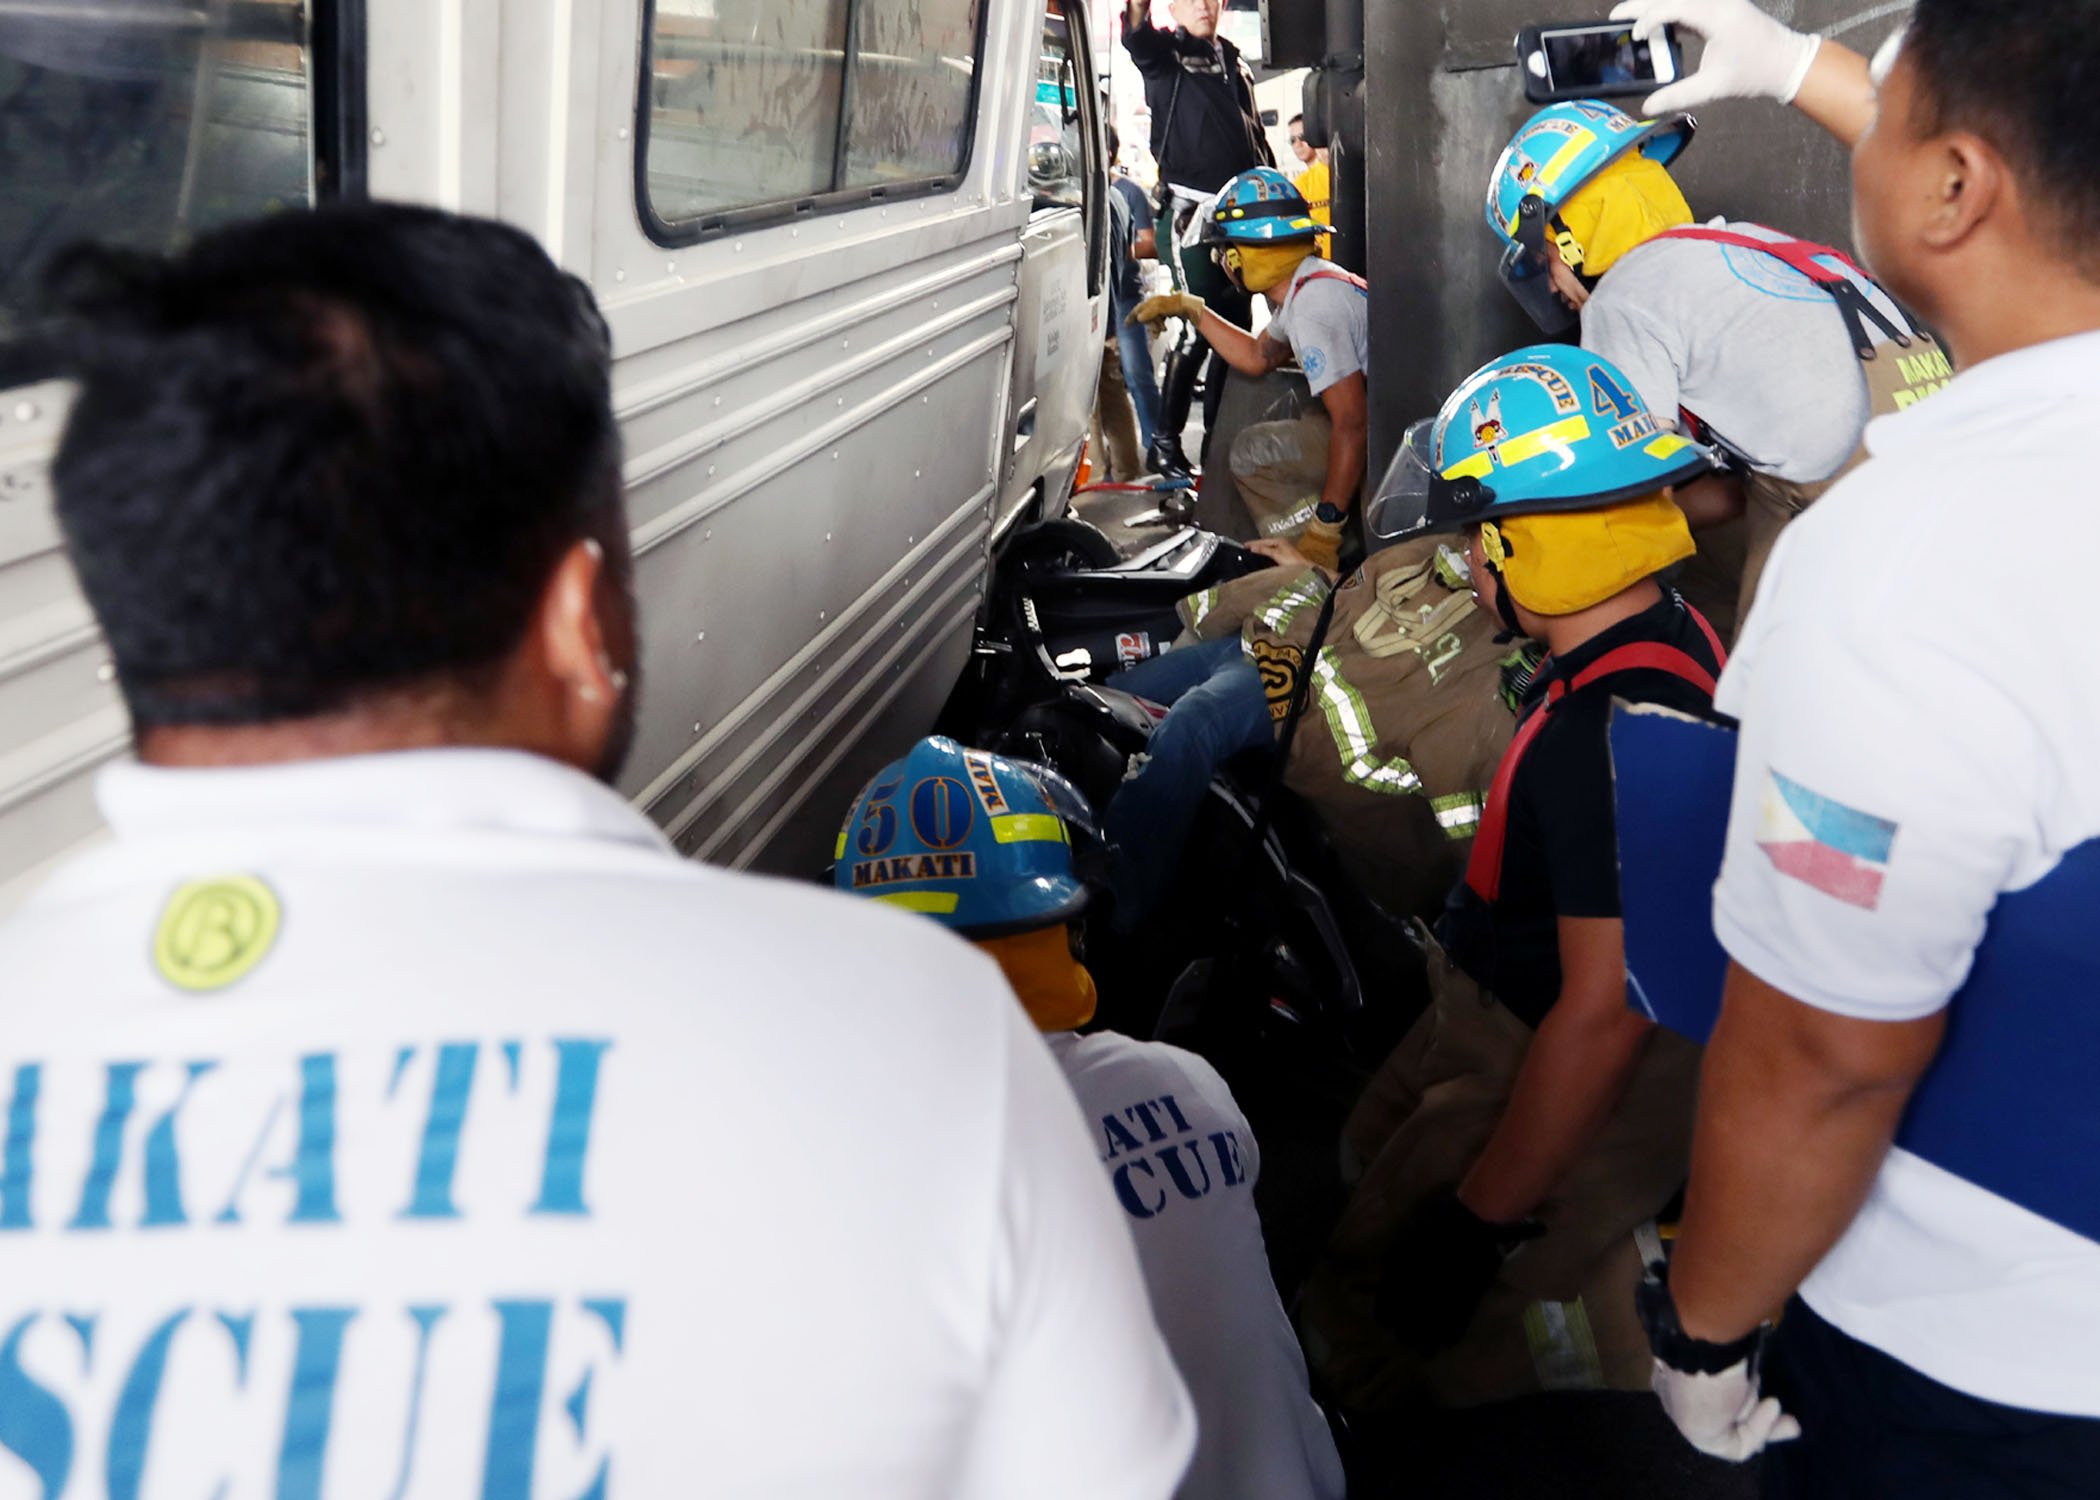 Makati rescue team in action